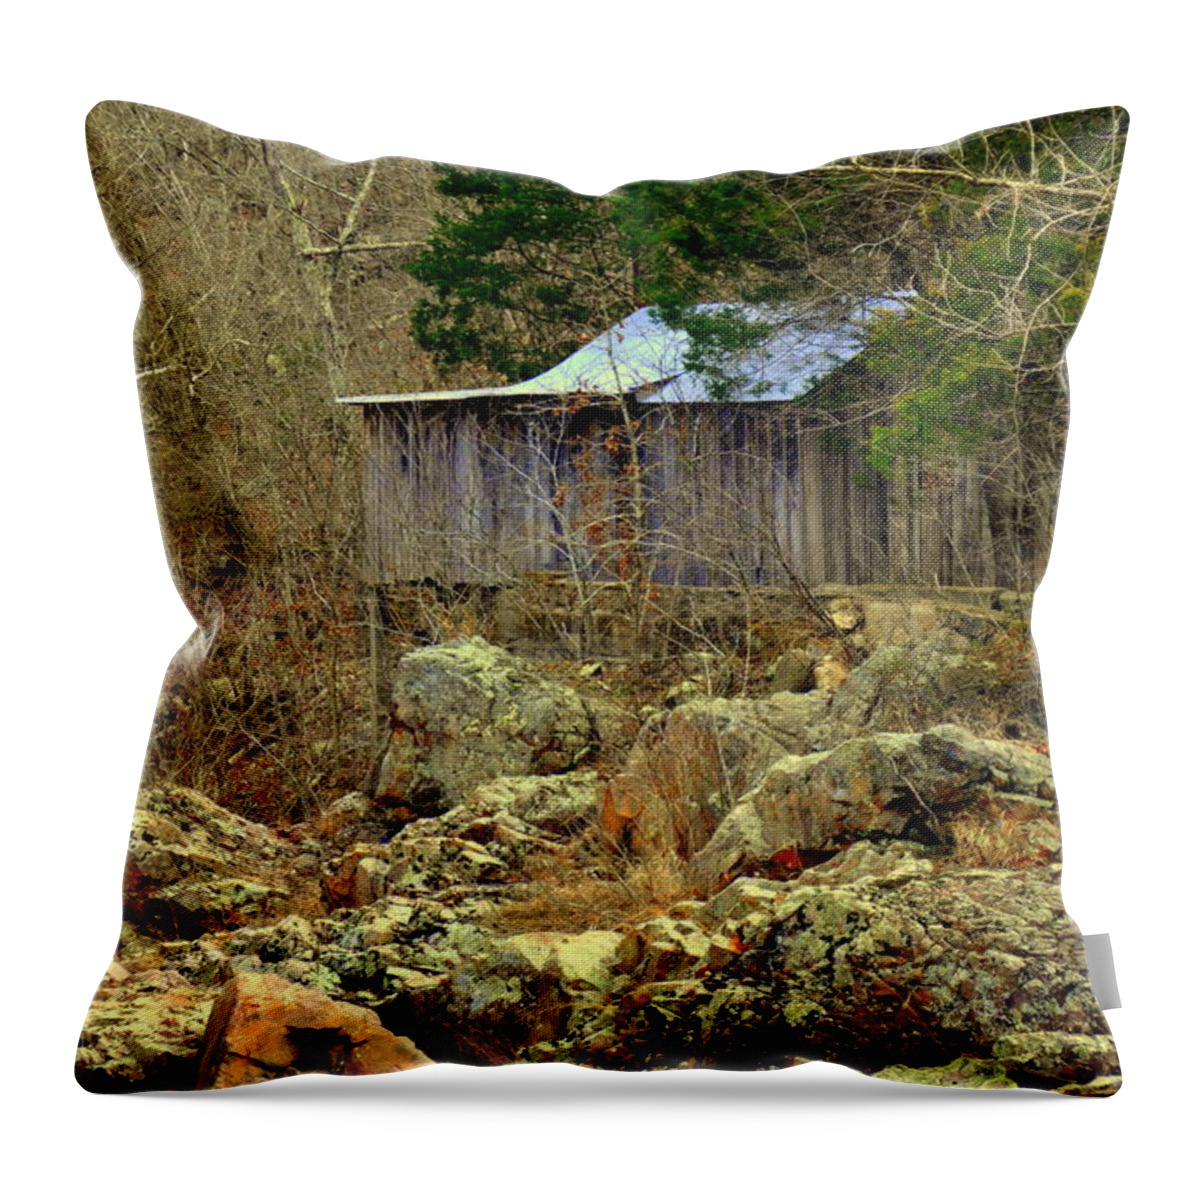 Mill Throw Pillow featuring the photograph Klepzig Mill by Marty Koch